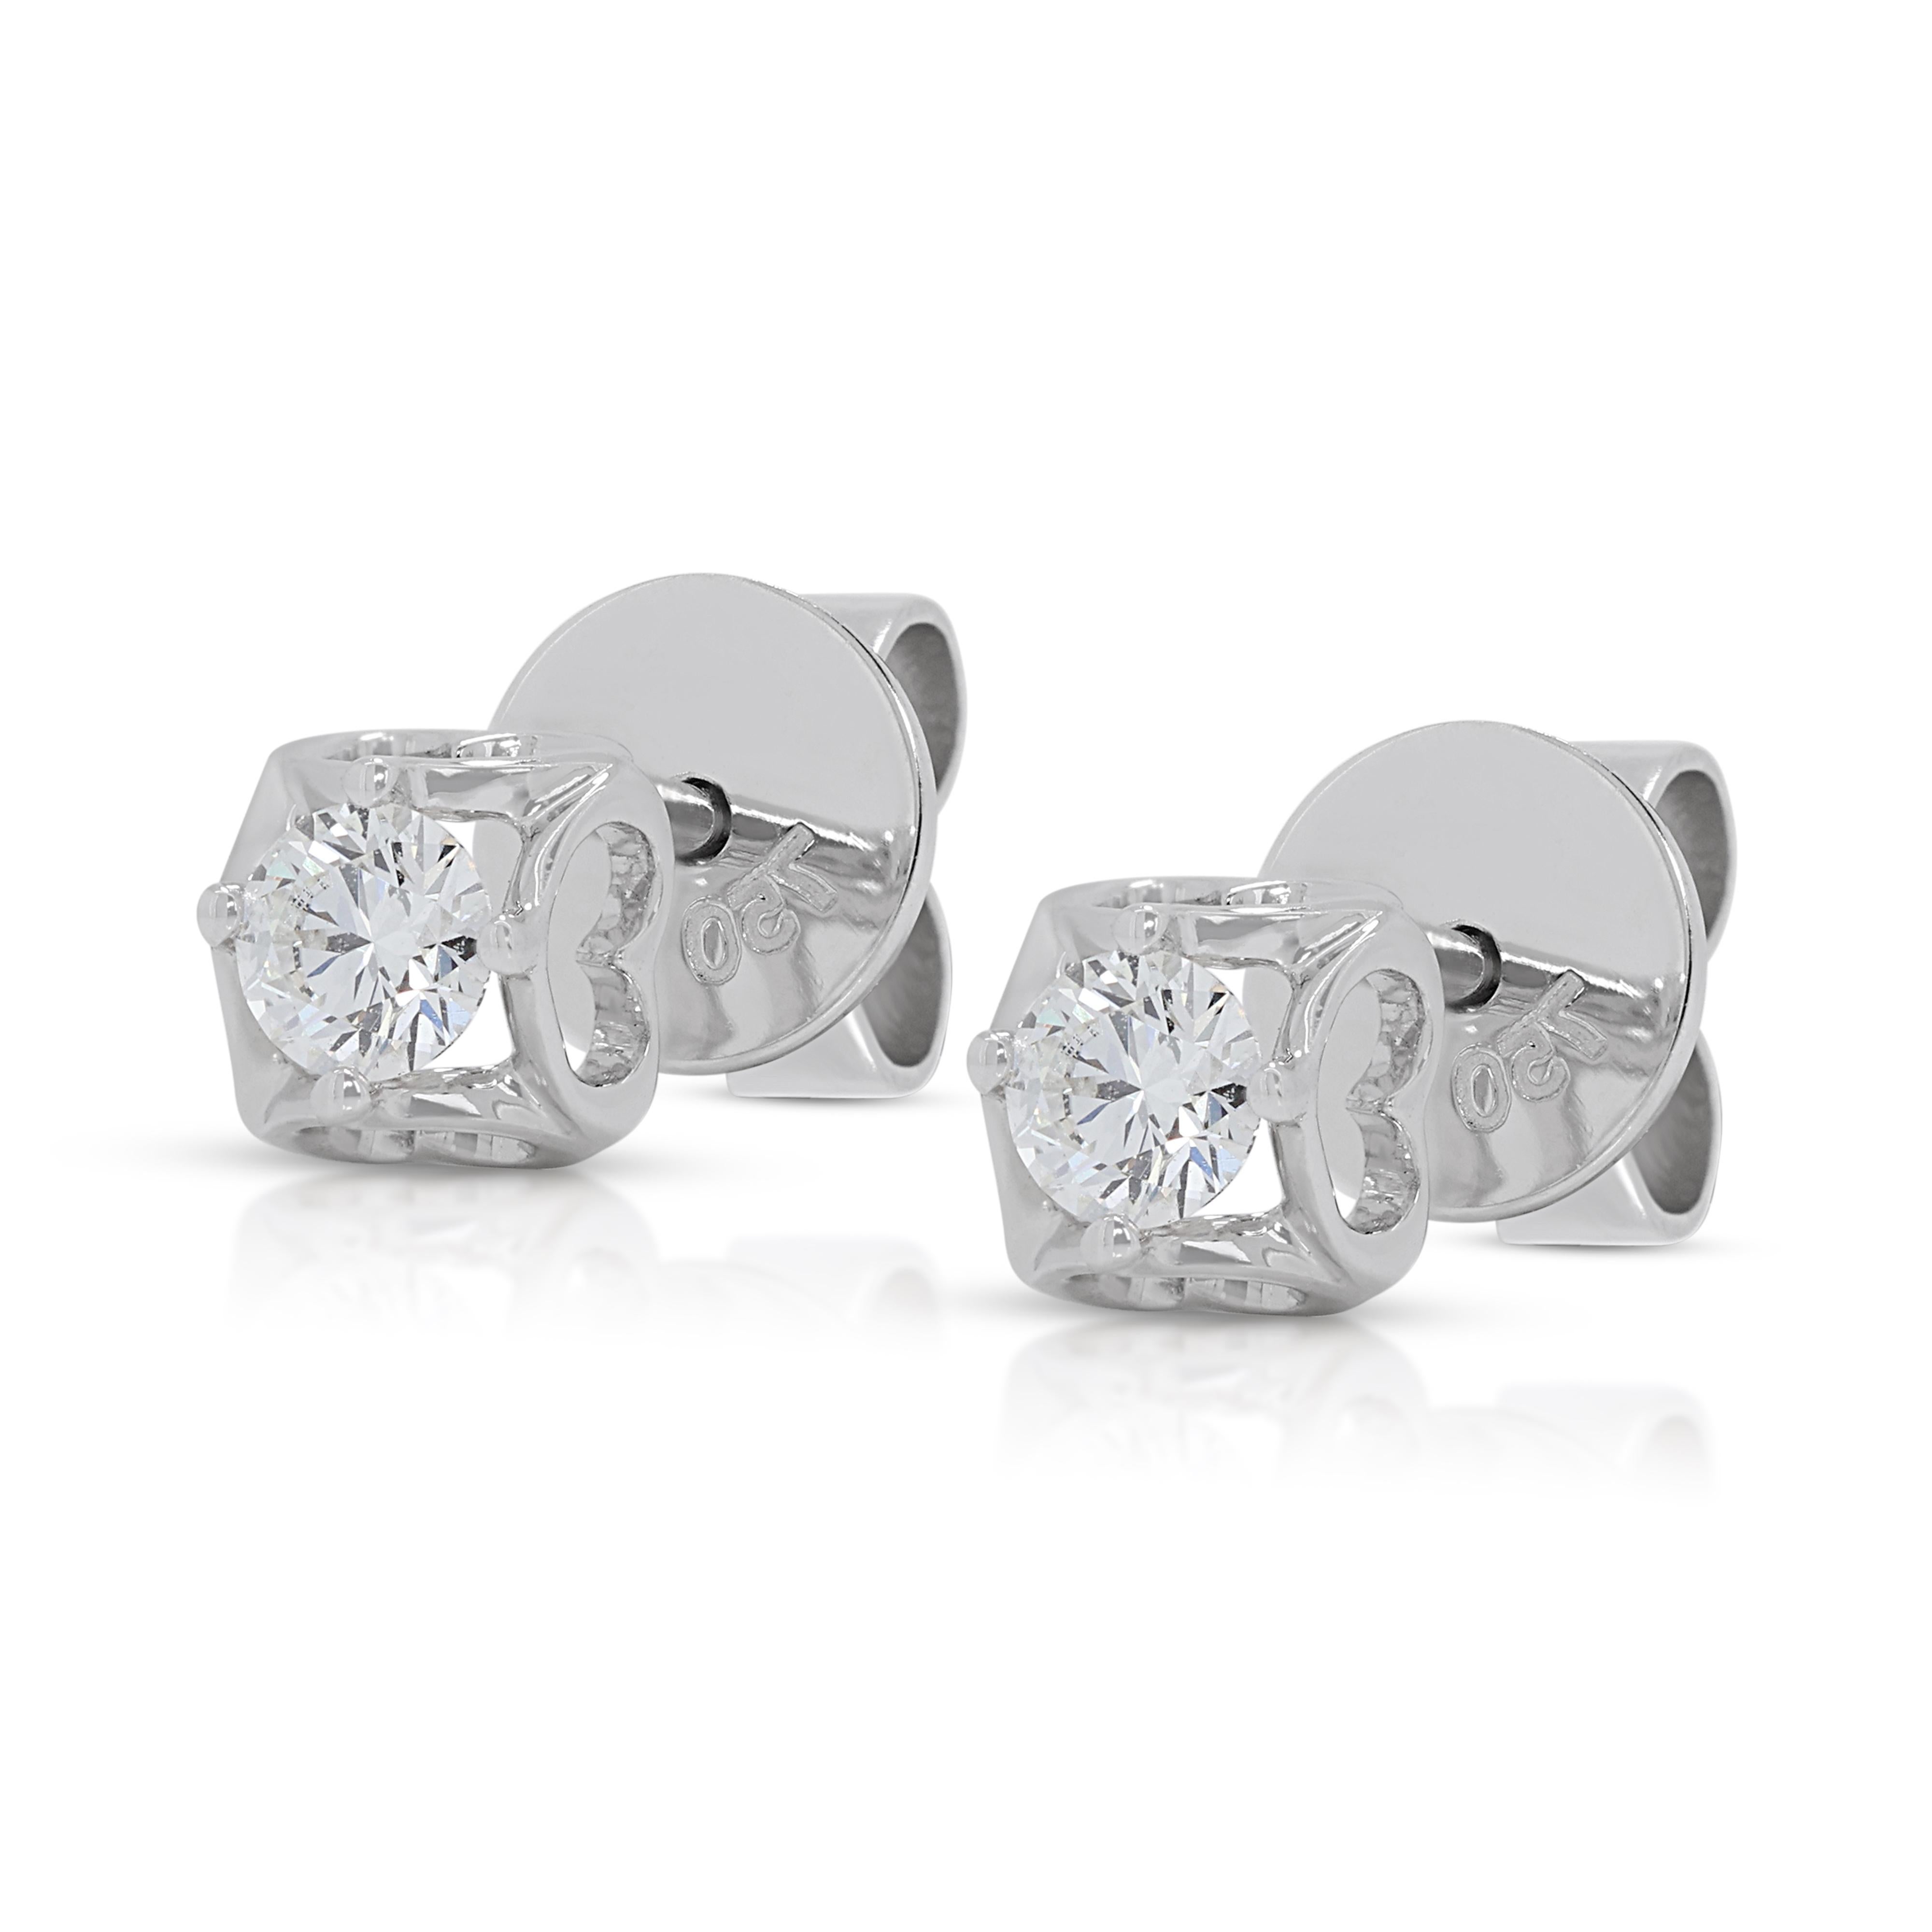 Luxurious 0.20ct Diamond Stud Earrings in 18k White Gold In Excellent Condition For Sale In רמת גן, IL